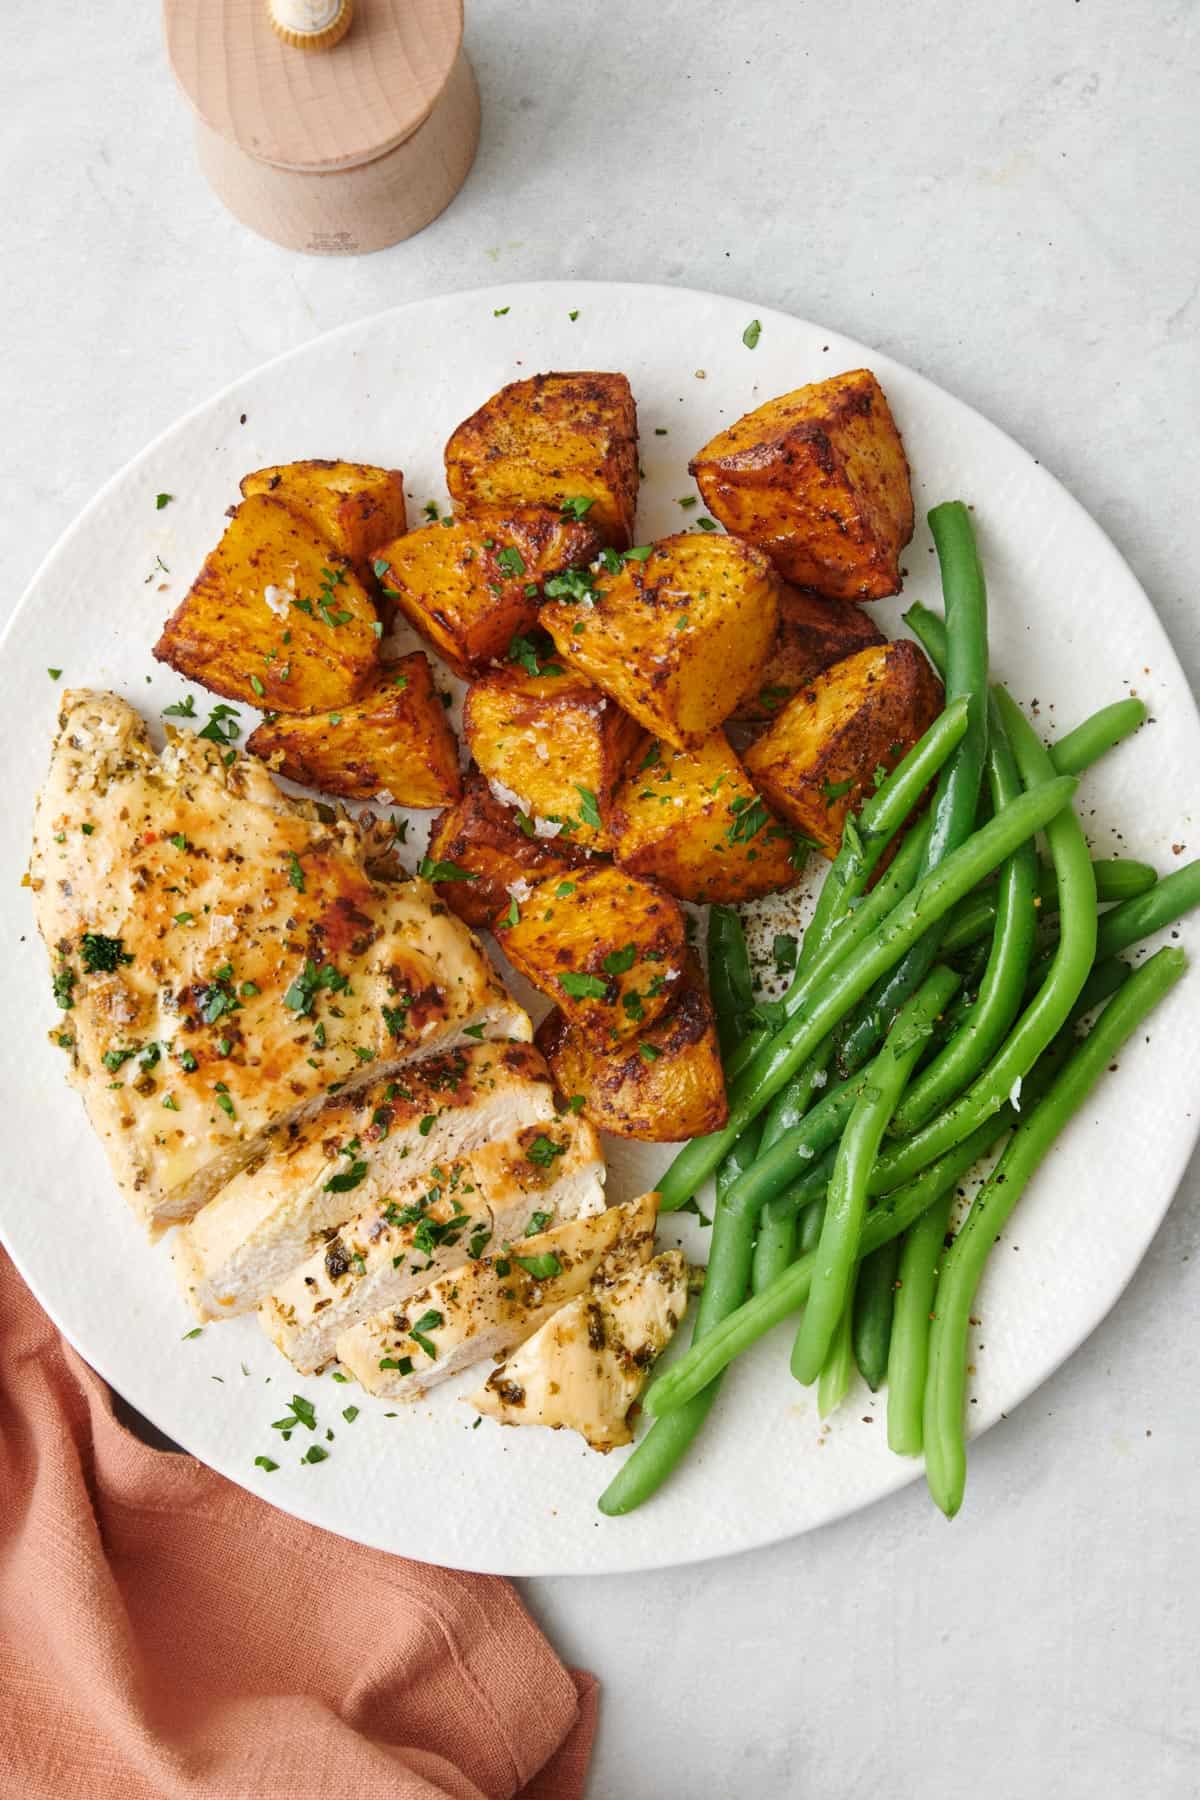 Lemon garlic chicken on a plate with crispy potato cubes and green beans.